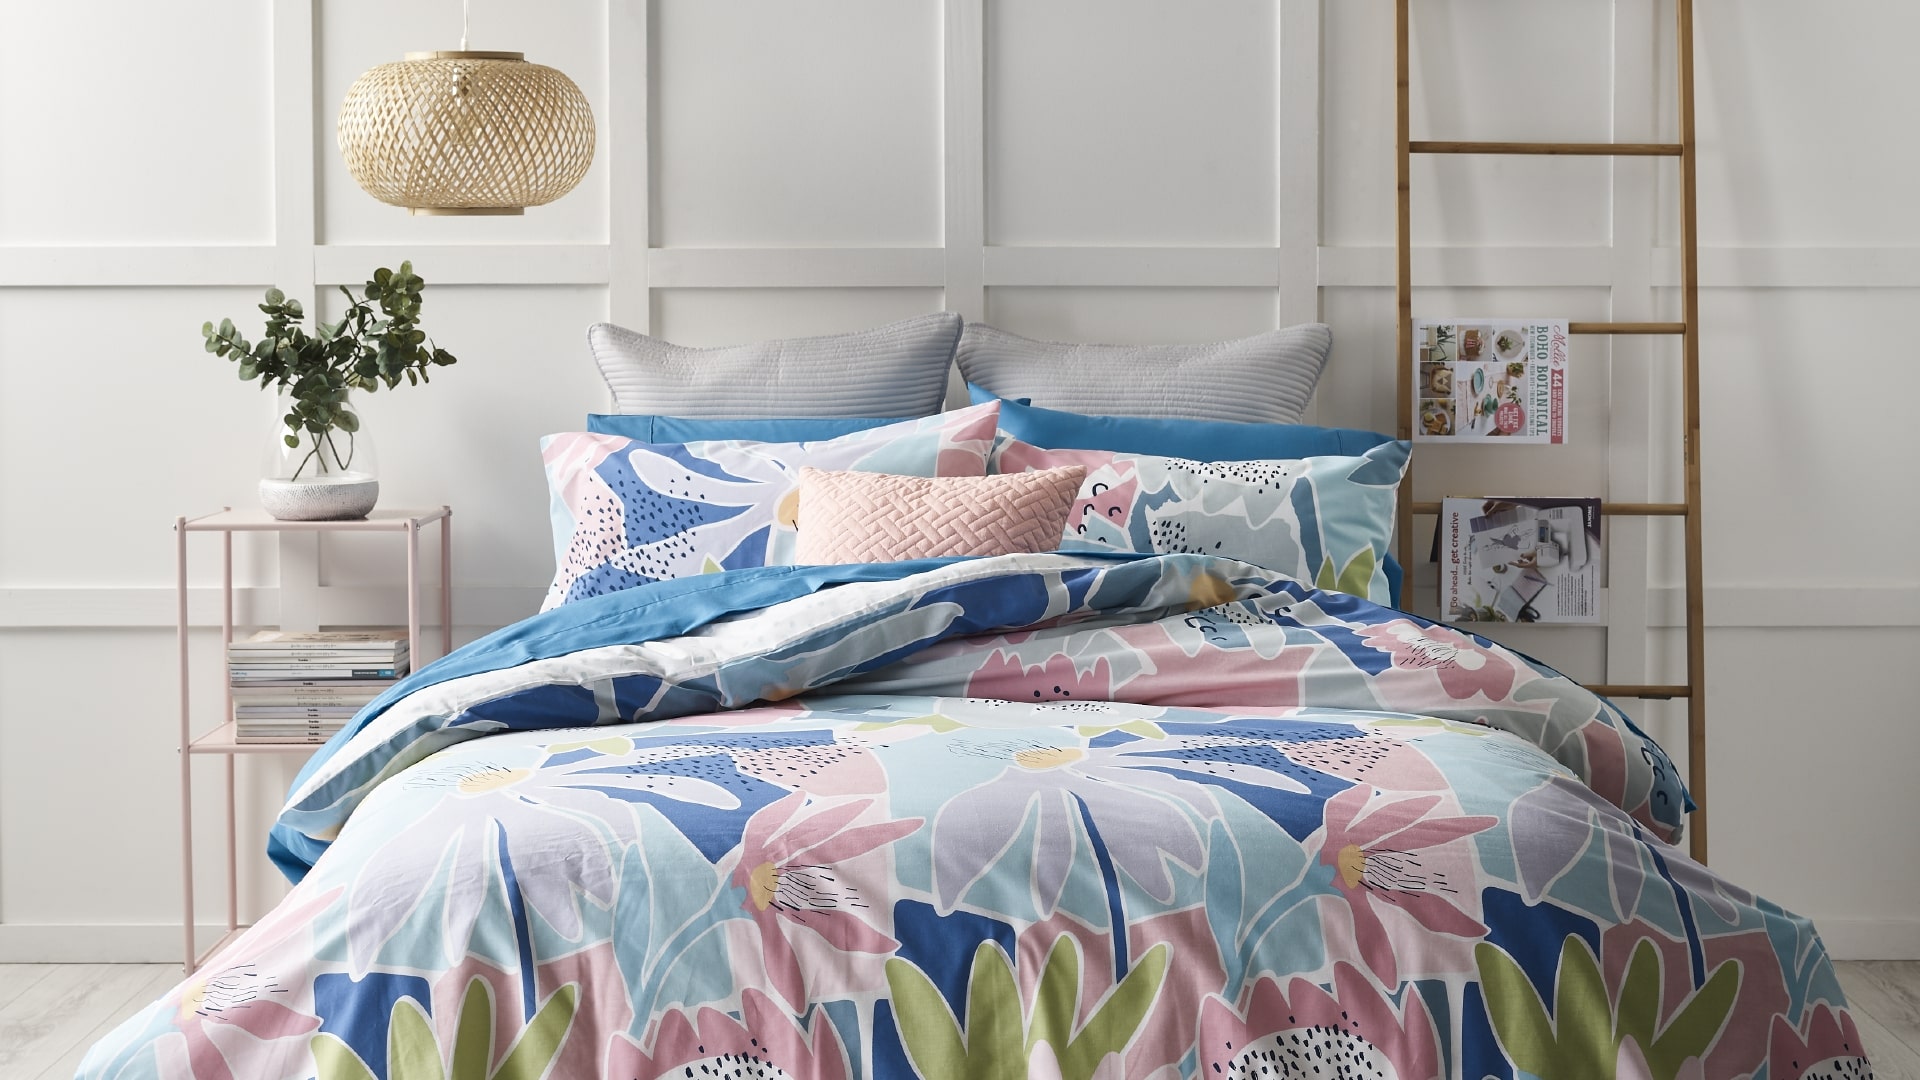 Caring For Your Bed Linen & Sheets